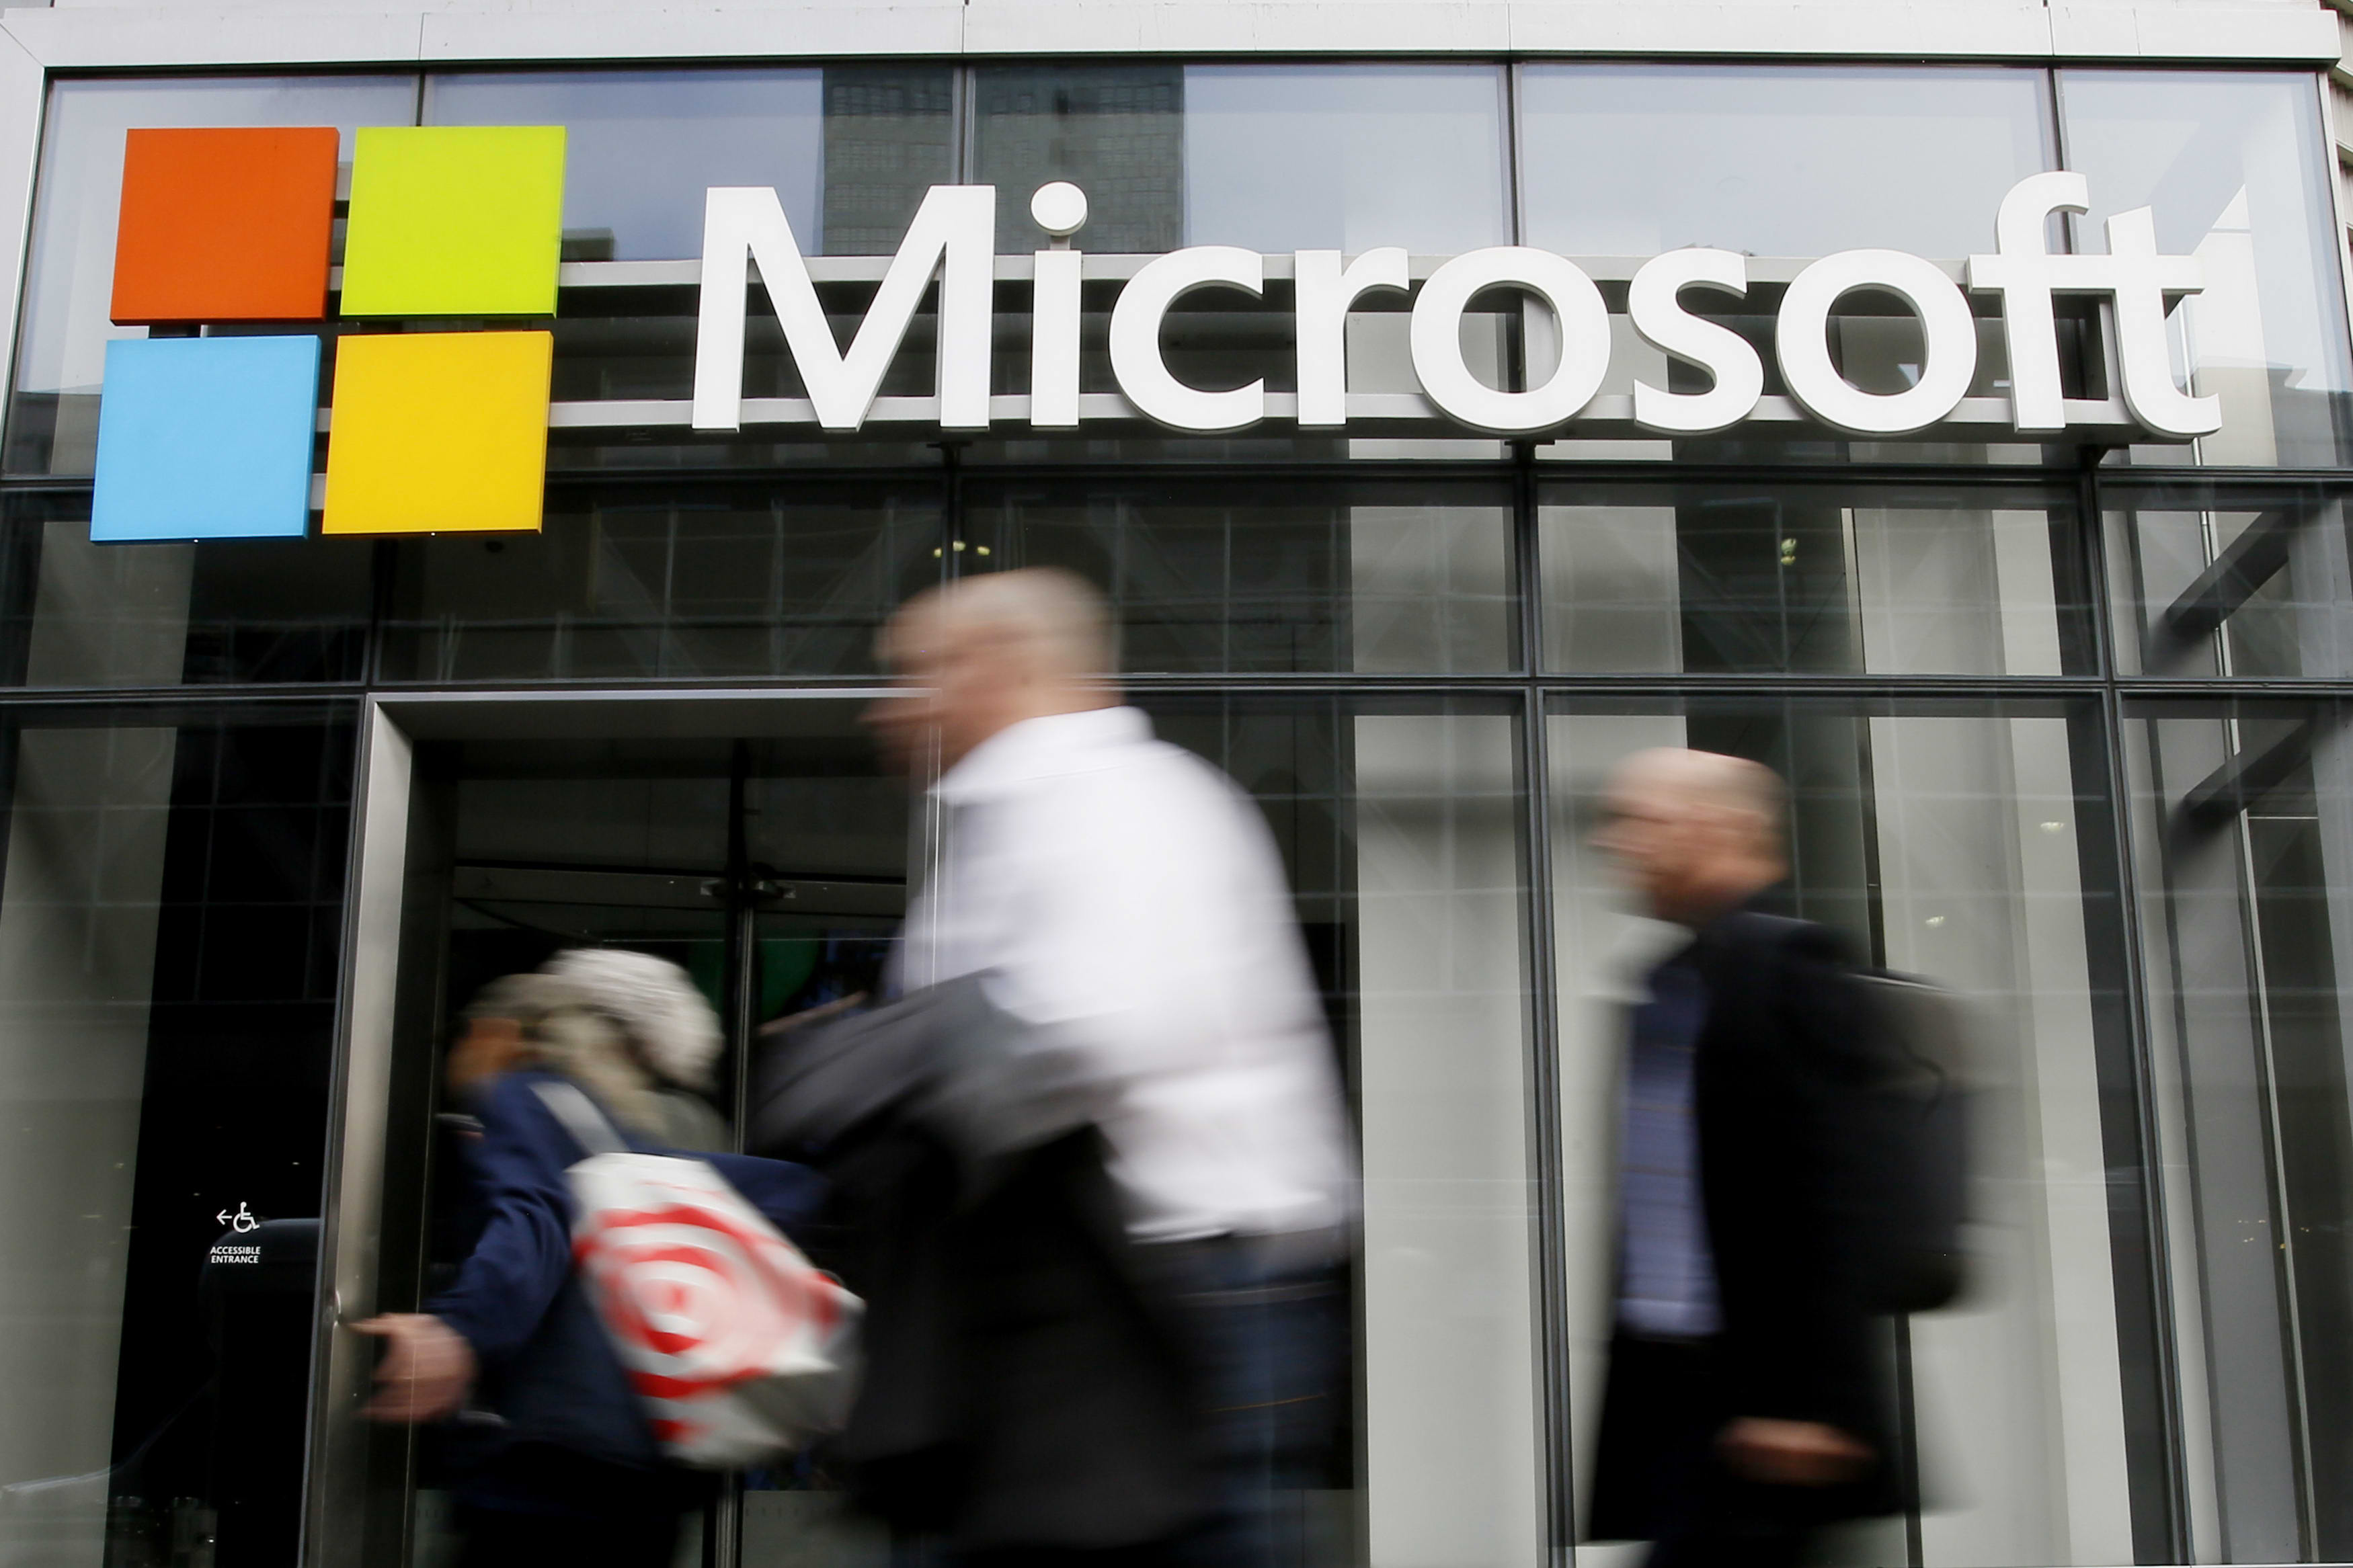 Goldman Sachs names Microsoft a top pick, says the tech giant can be resilient in an economic downturn